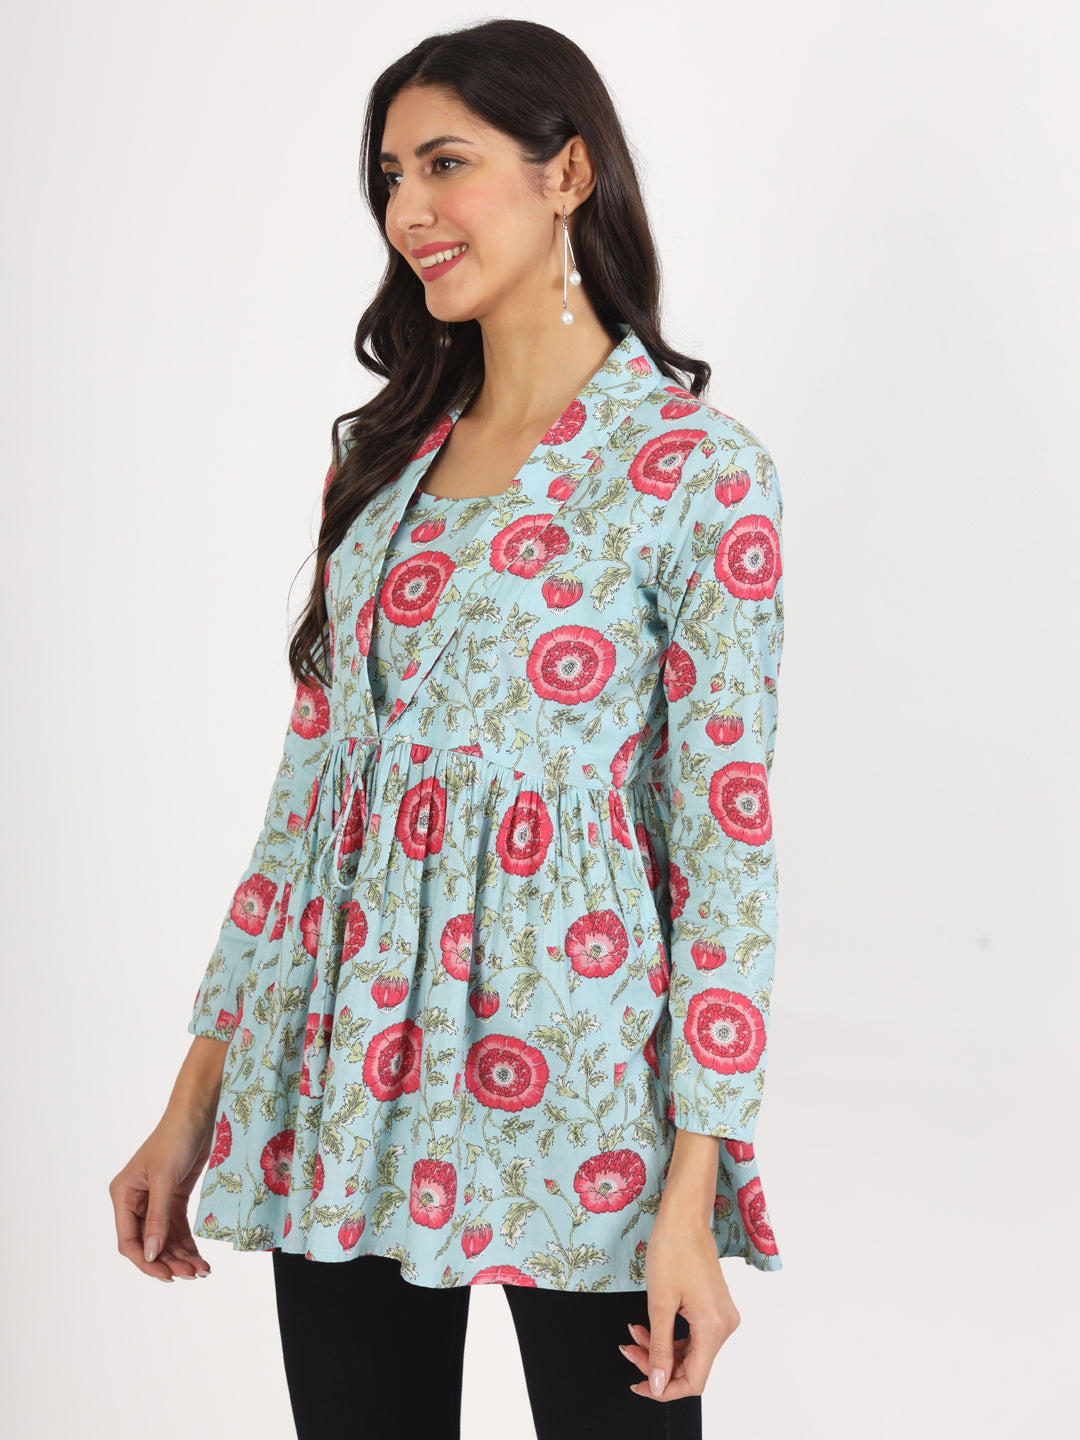 Sky Blue Floral Printed Cotton Top